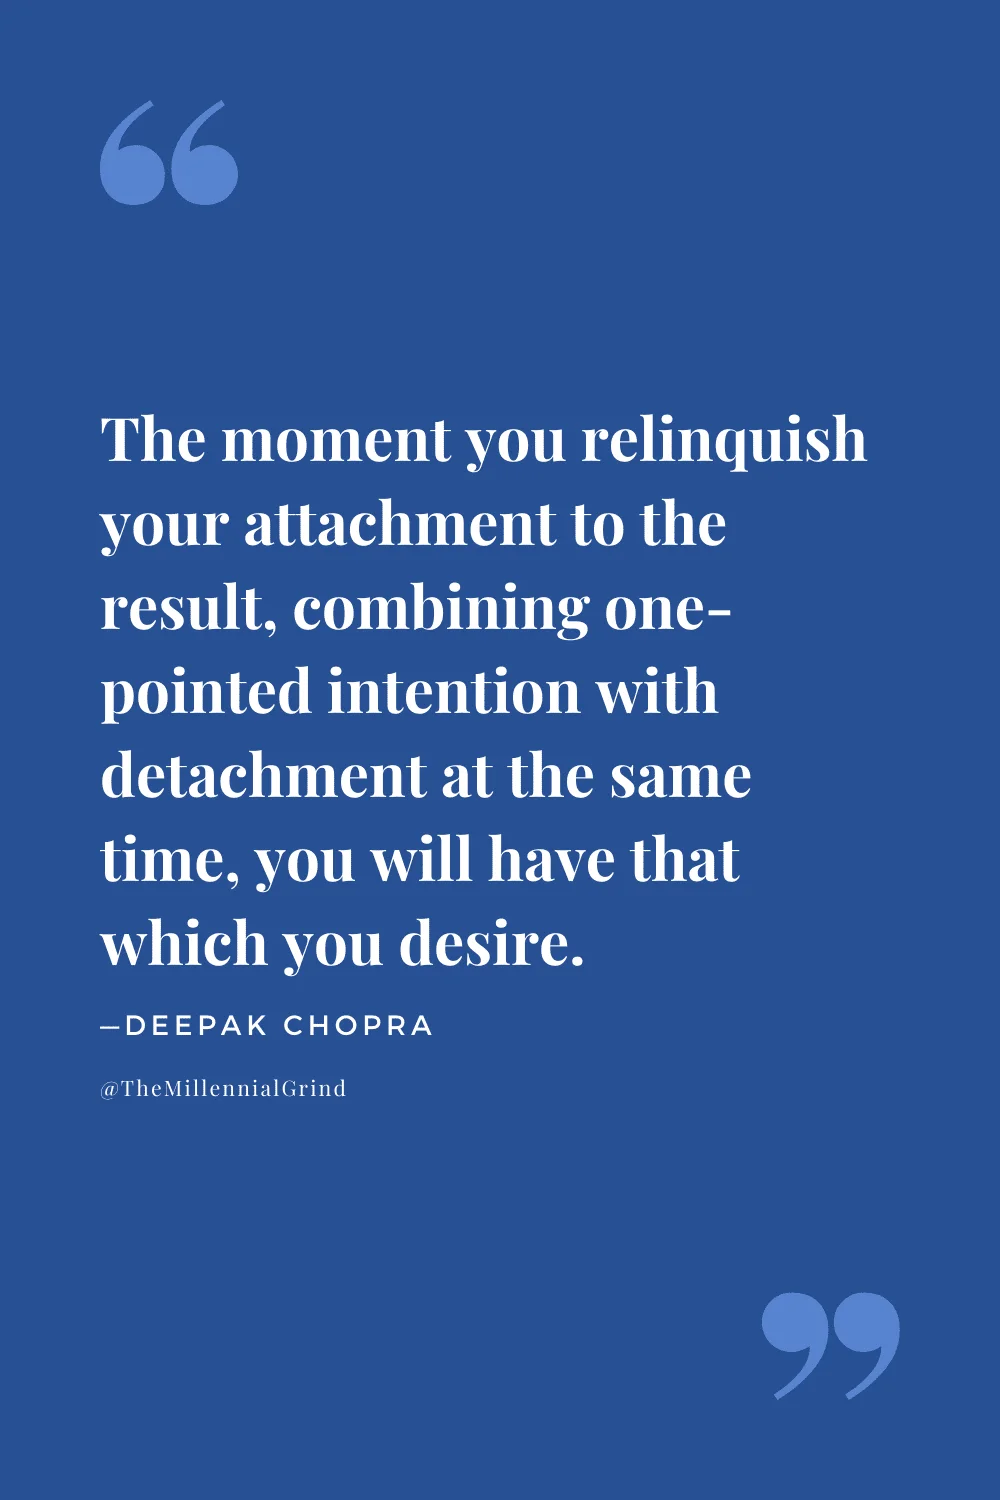 The Law of Detachment Quote